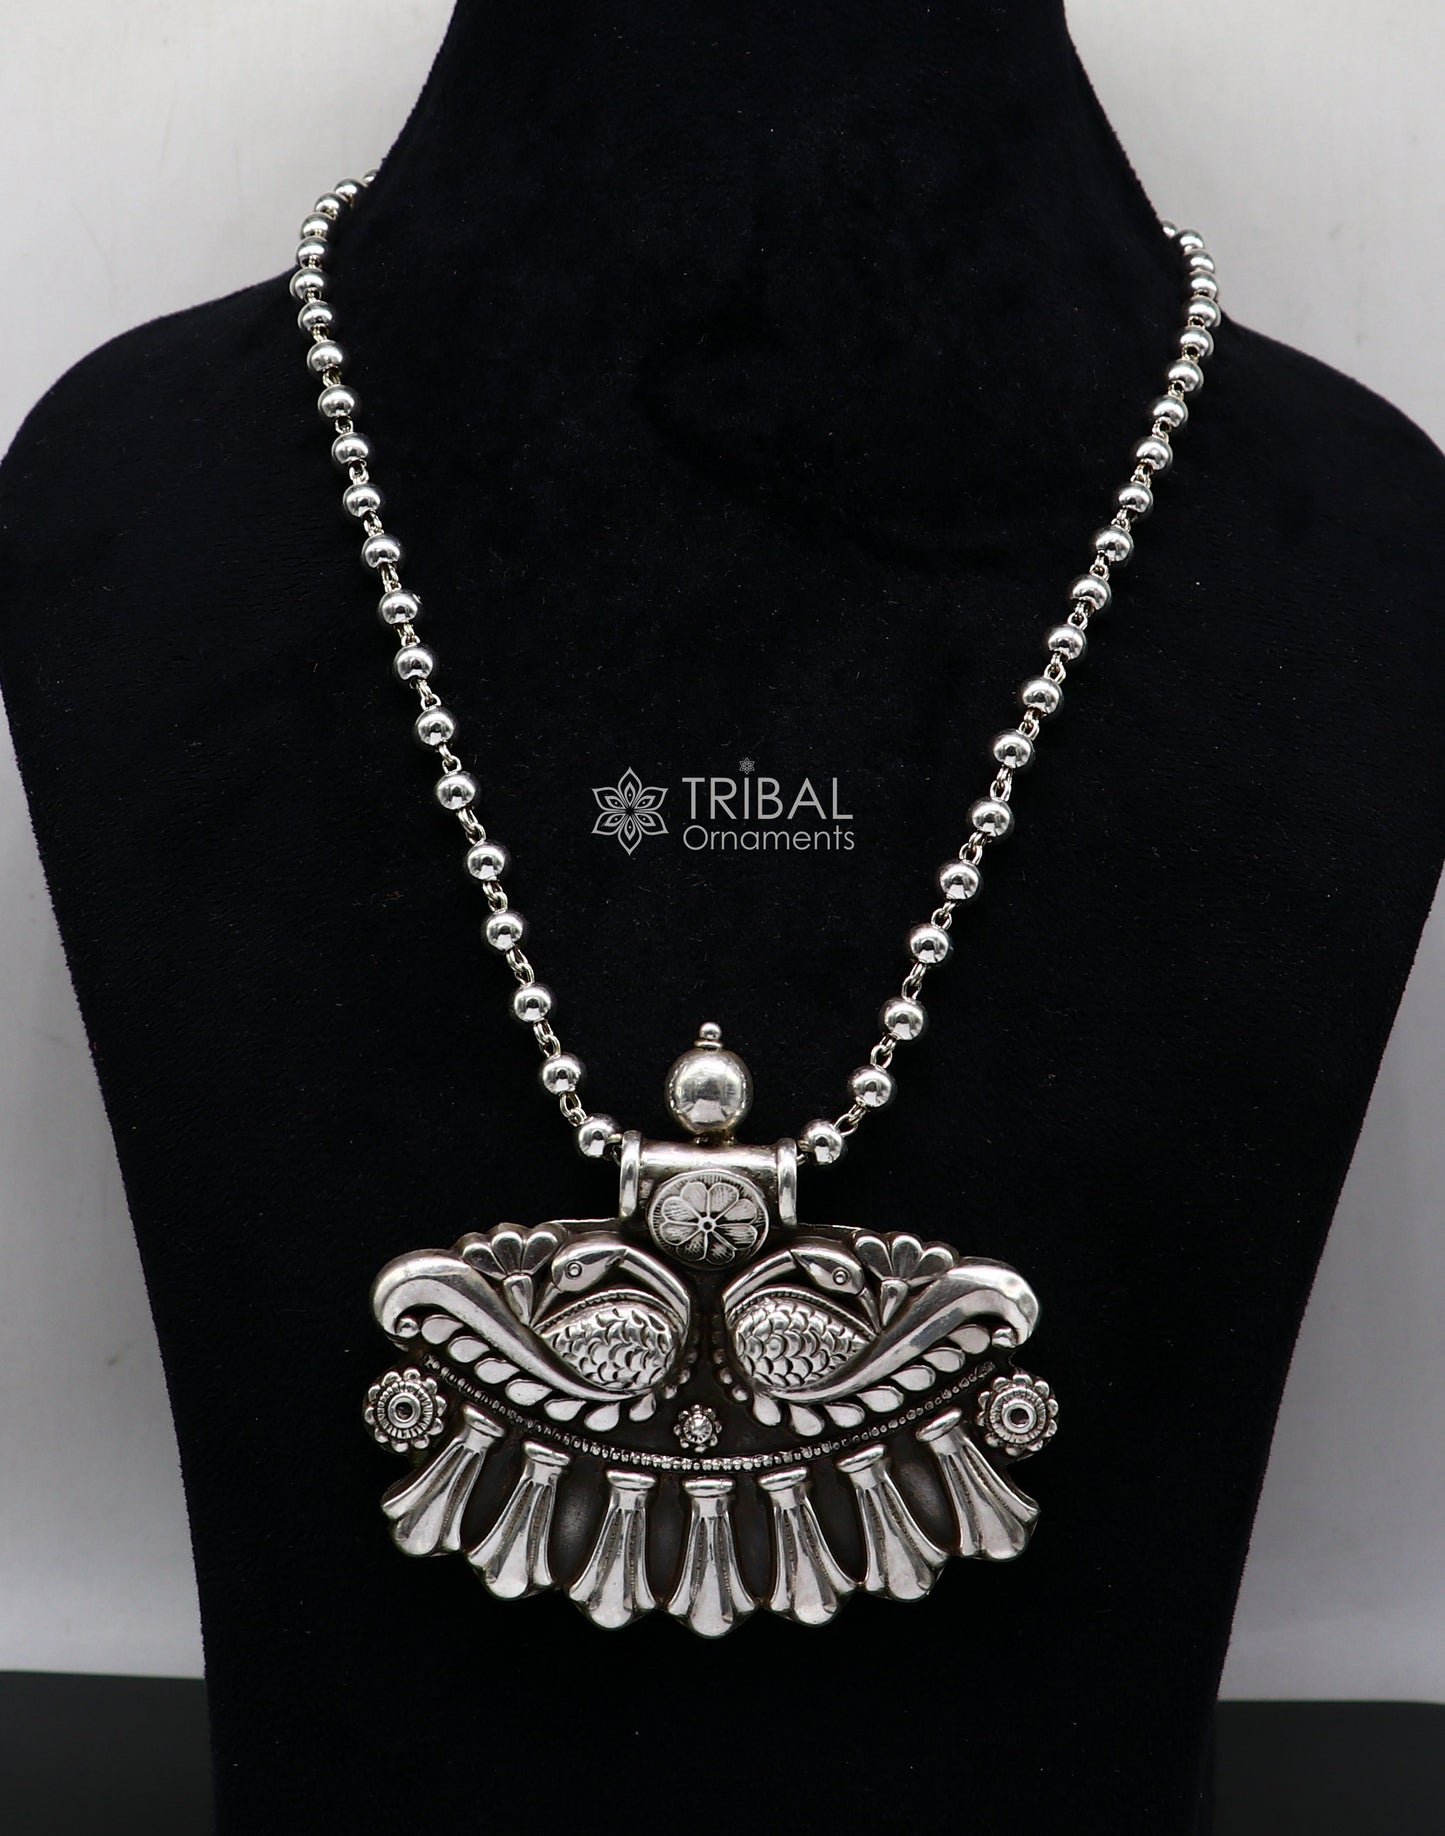 Vintage cultural design trendy 925 sterling silver handmade pendant style ethnic tribal functional long necklace jewelry India nsp584 - TRIBAL ORNAMENTS